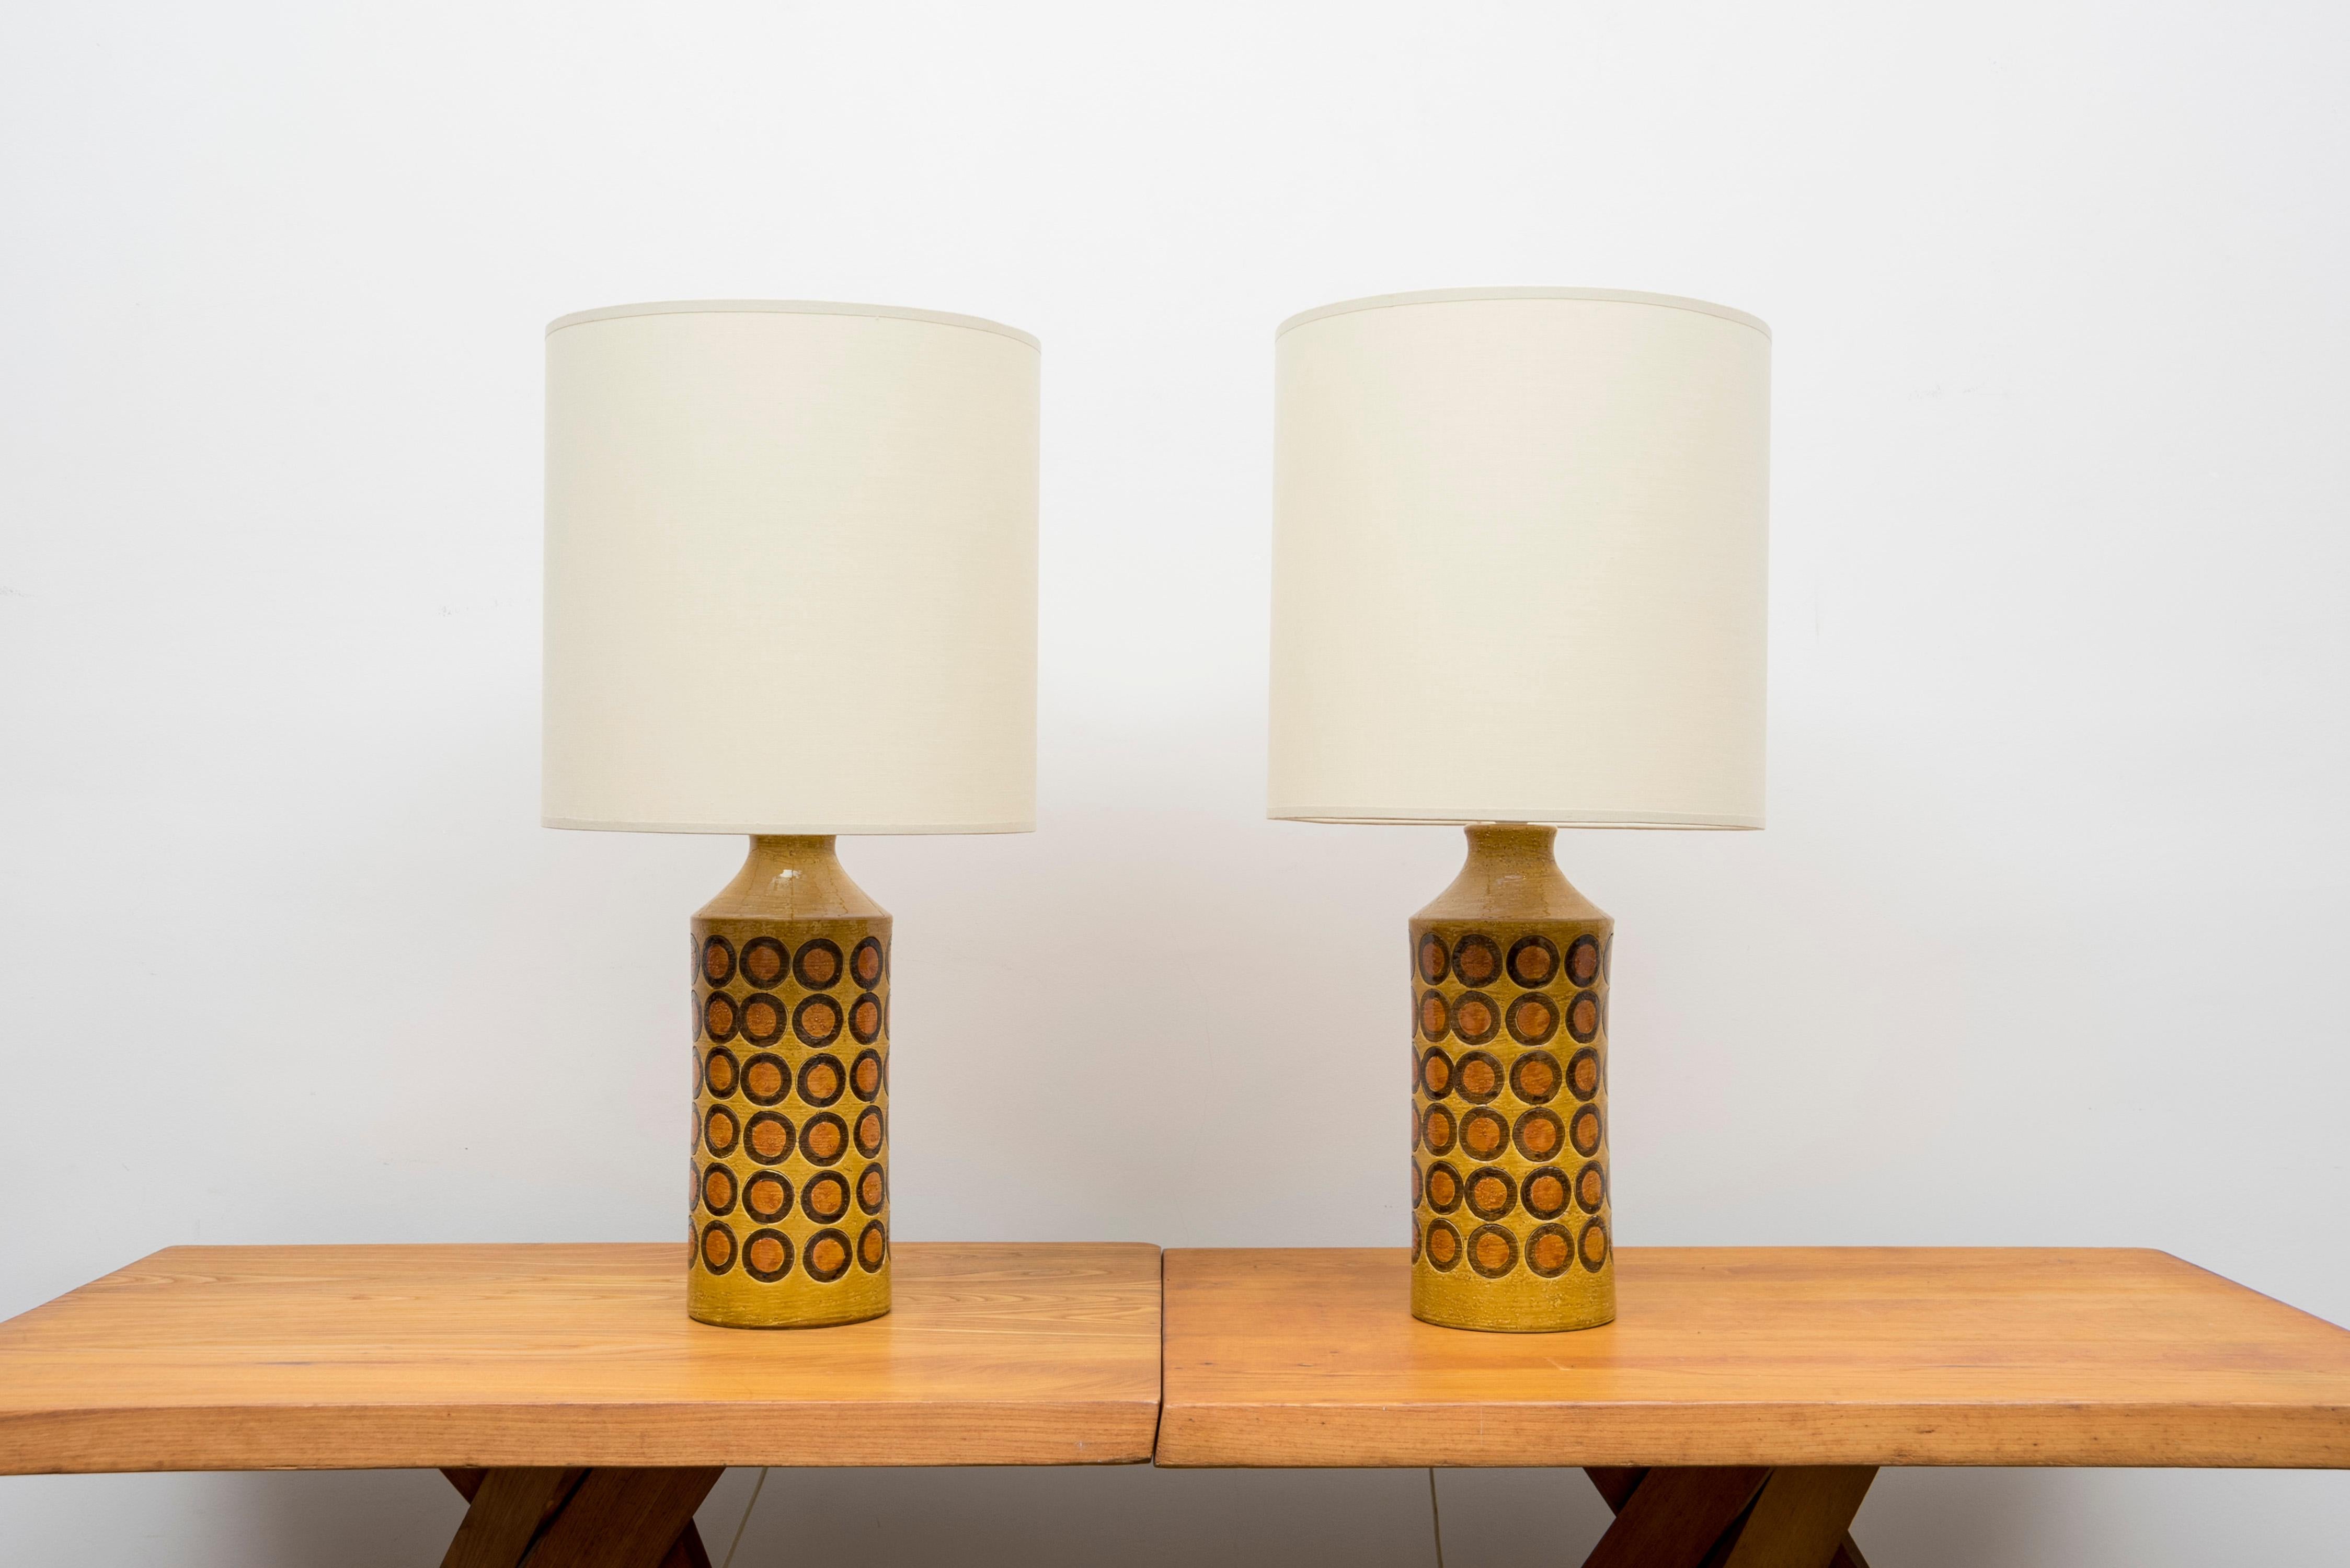 Pair of cylindrical table lamps,
Enamelled ceramic
Produced by Bitossi for the Swedish market
With label: made in Italy and reference number
Bitossi, Italy circa 1970.